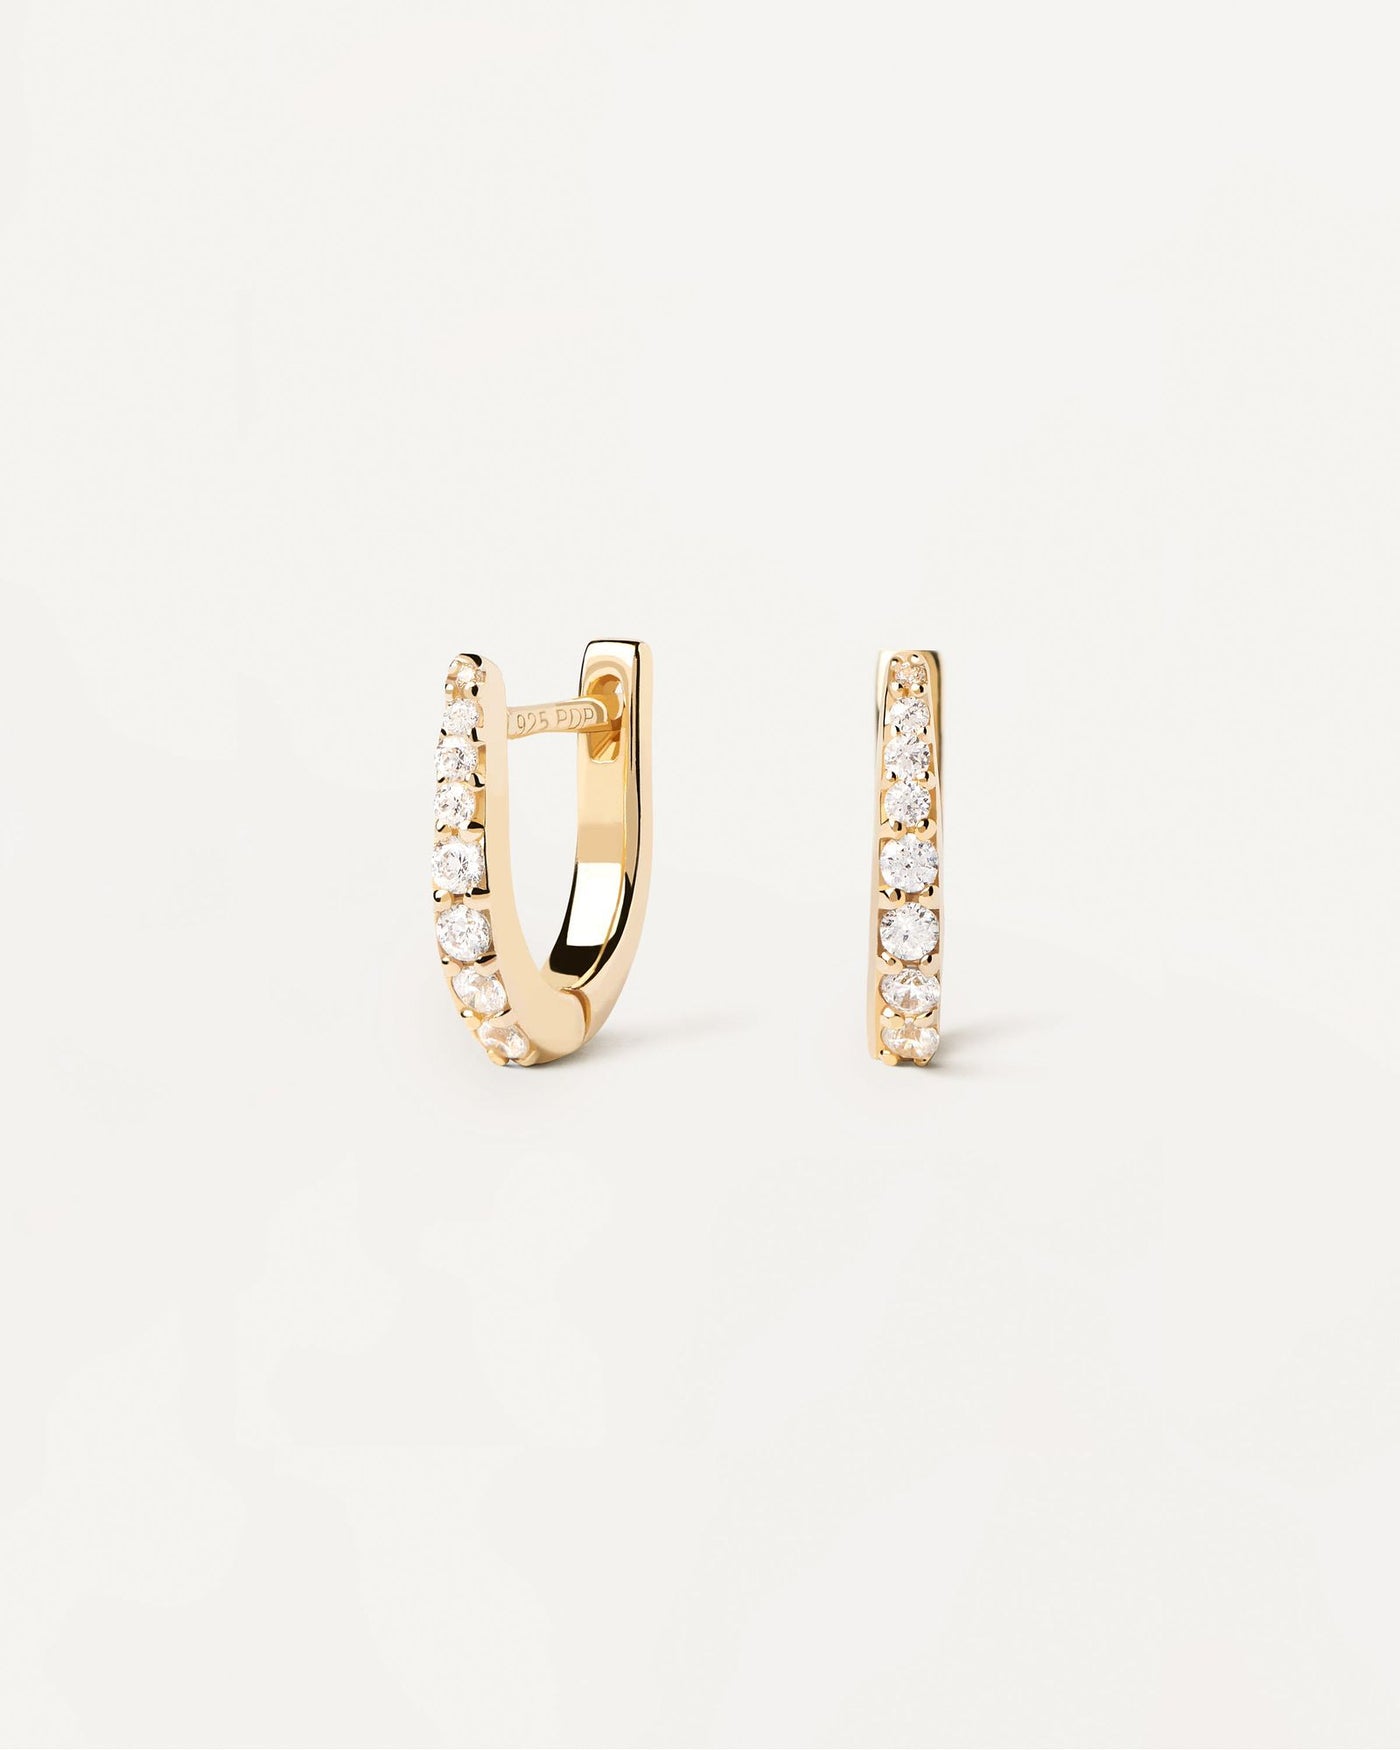 2024 Selection | Stare Earrings. Pointy hoops in gold-plated silver with white zirconia. Get the latest arrival from PDPAOLA. Place your order safely and get this Best Seller. Free Shipping.